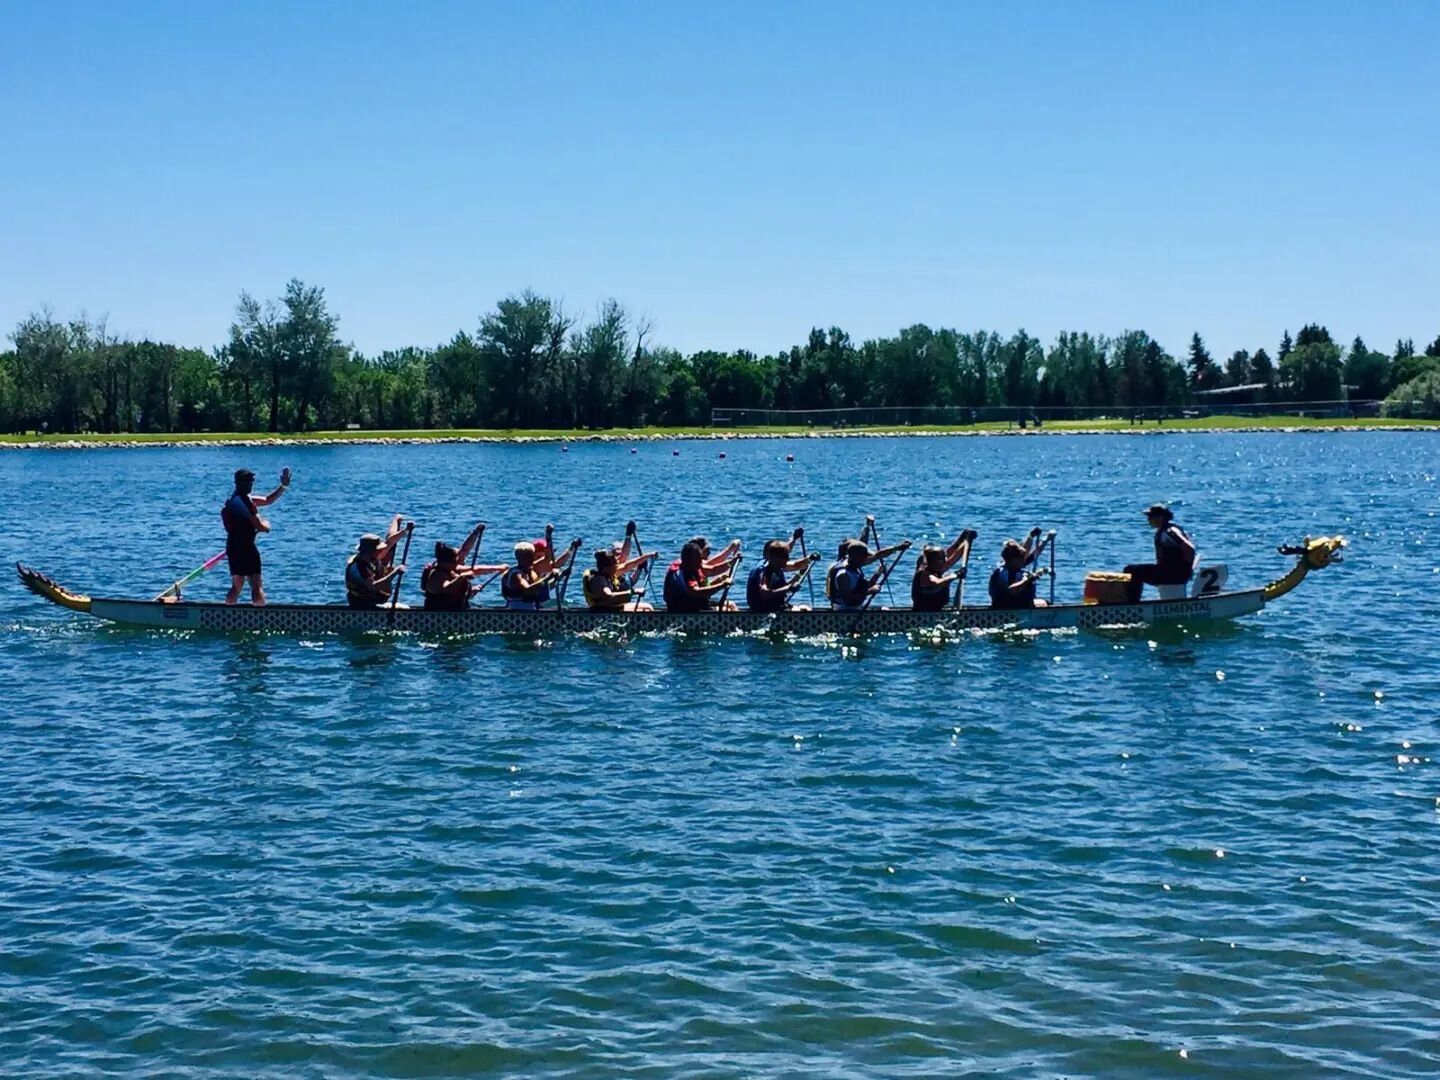 Just out for a paddle at @lethdragonfest 
.
.
#lethdragonfest #lethdragonfest22 #yycdbs #paddlesupyyc #redeyesdragonboat